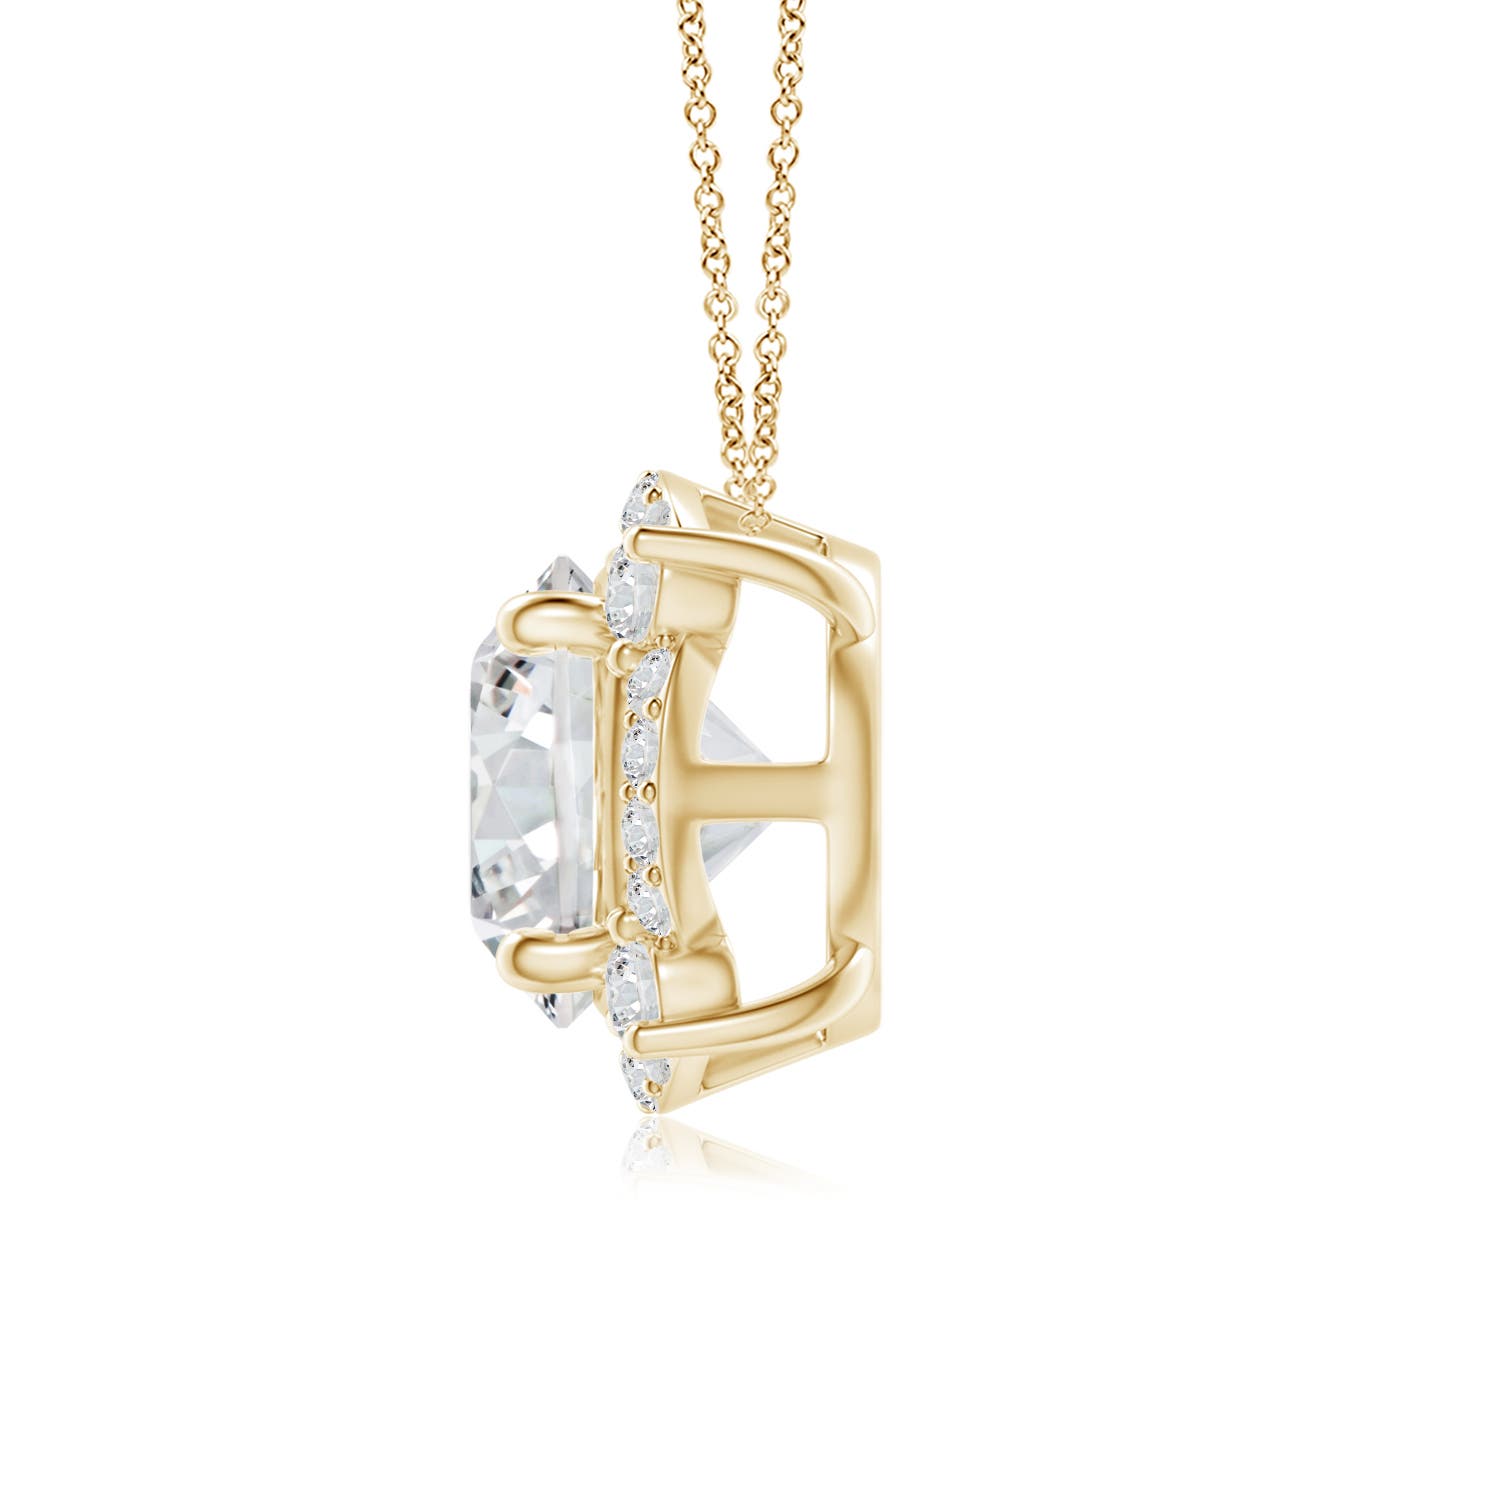 H, SI2 / 1.18 CT / 14 KT Yellow Gold